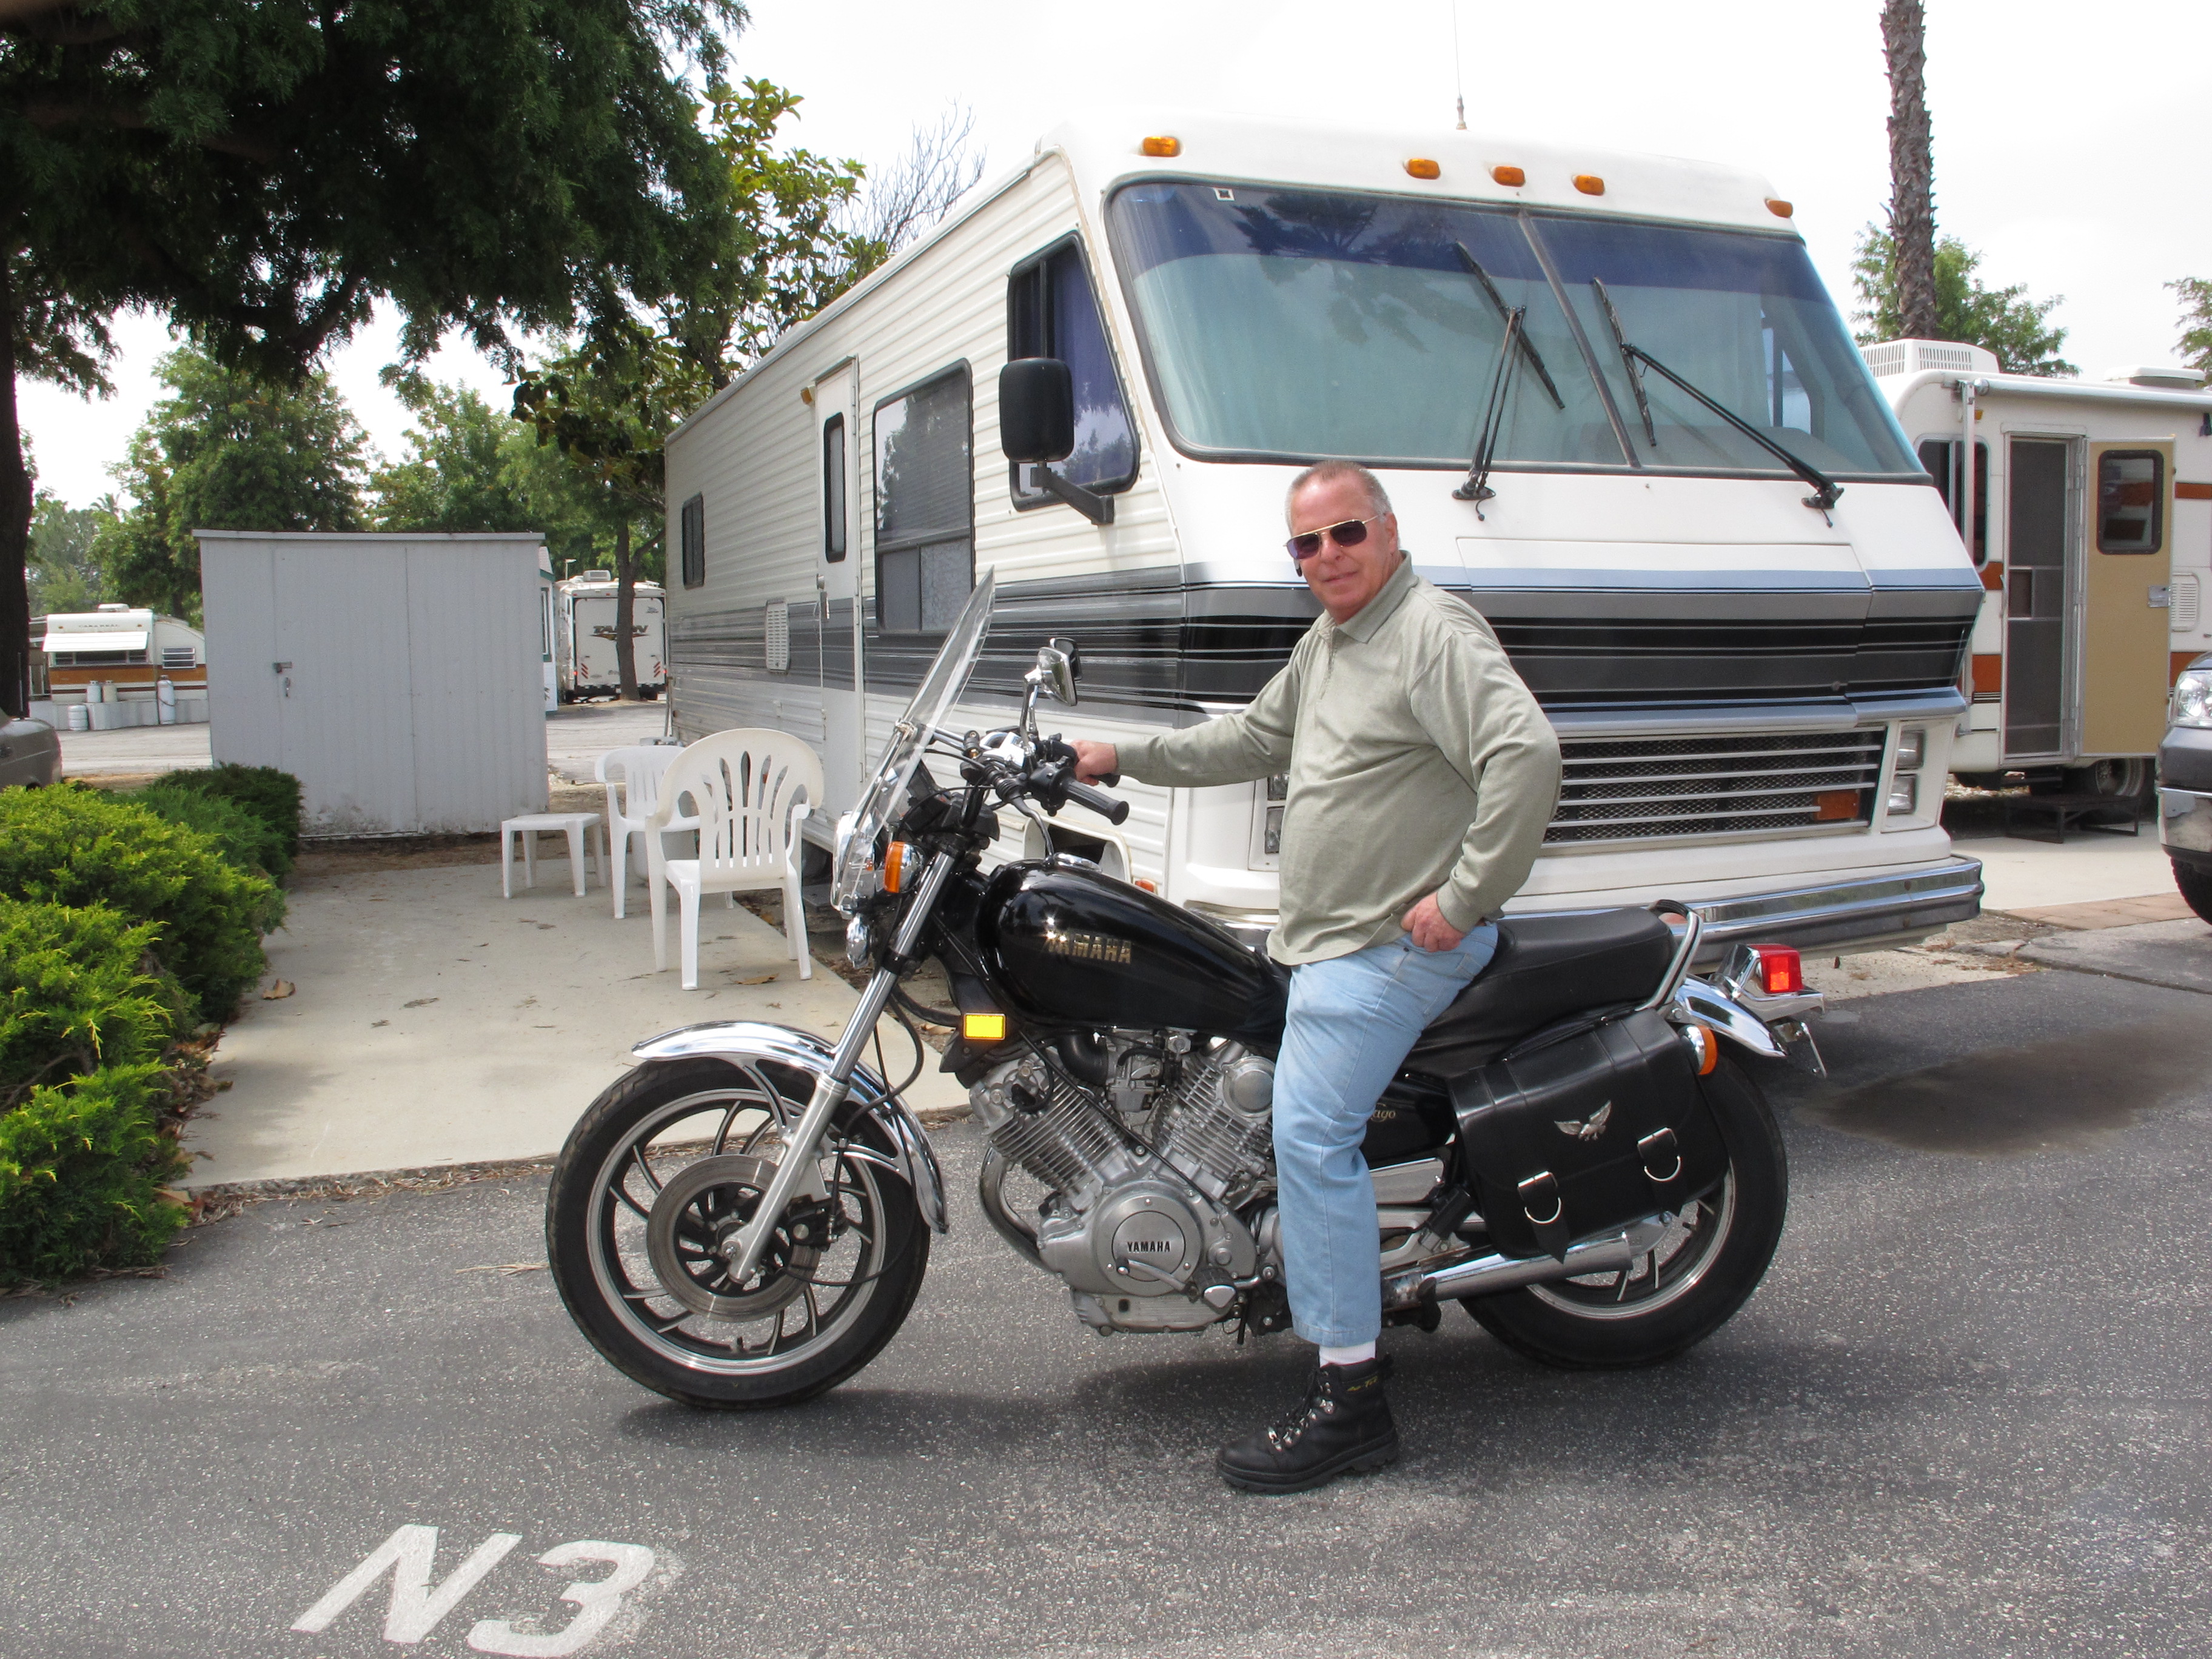 Me and my Motorcycle and Motor Home.